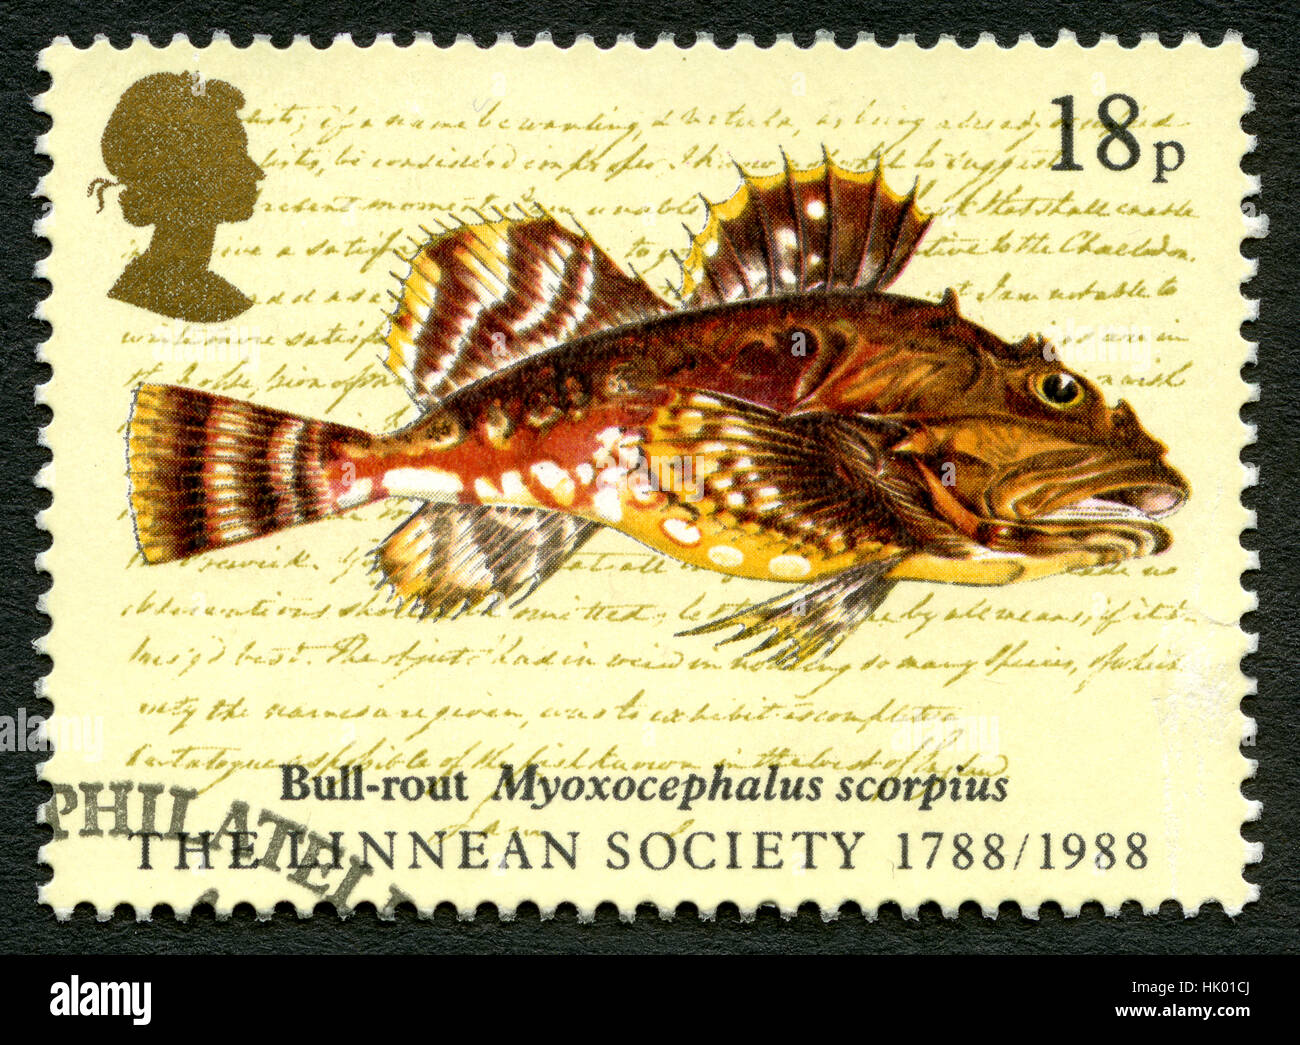 GREAT BRITAIN - CIRCA 1988: A used postage stamp from the UK, depicting an illustration of a Bull-rout fish, circa 1988. Stock Photo